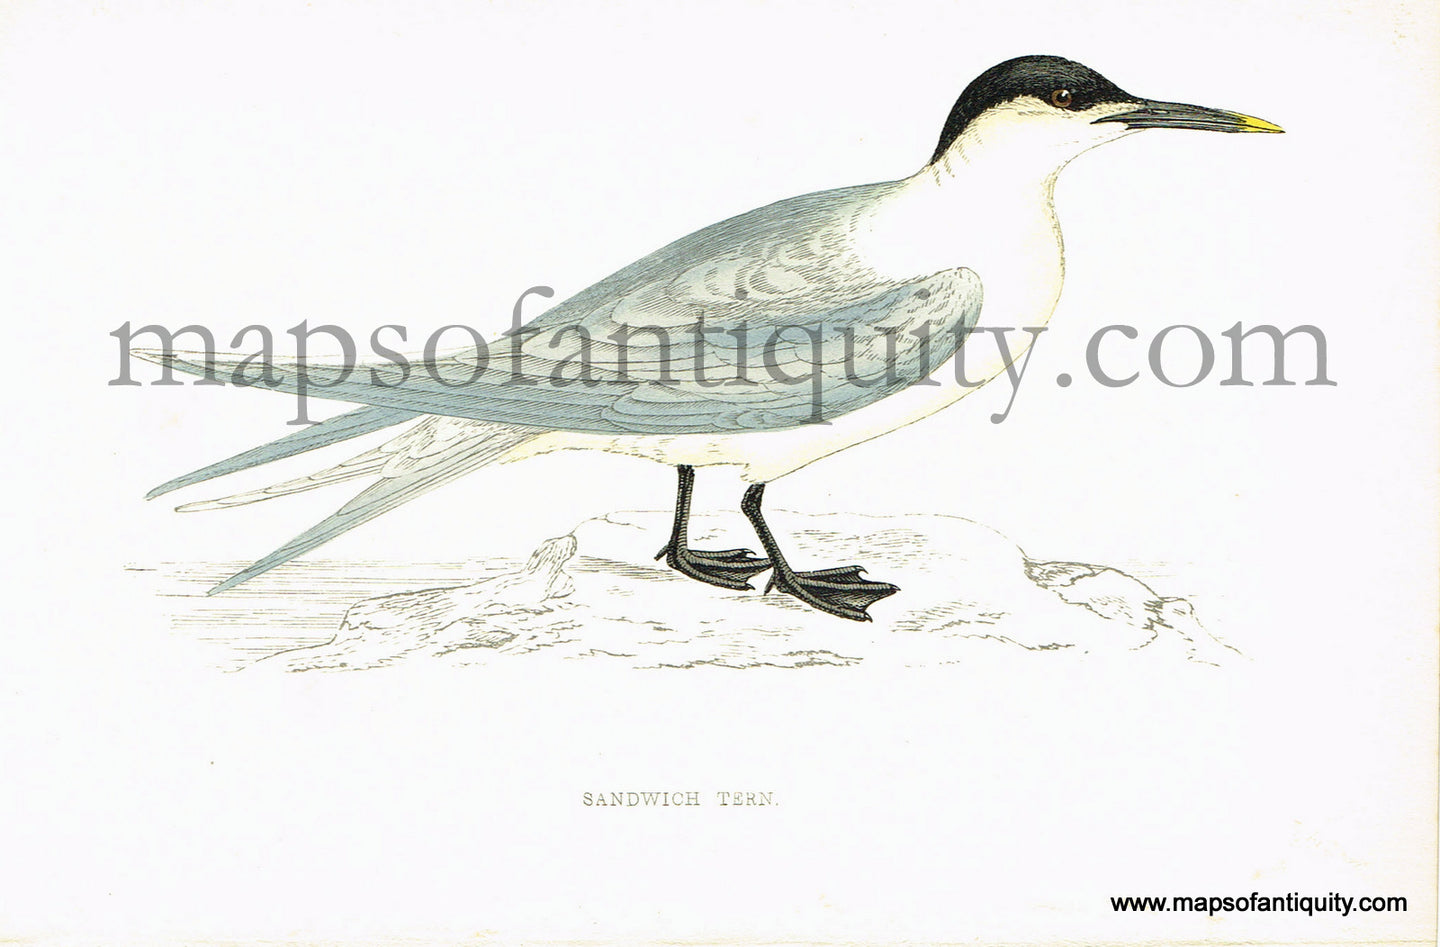 Antique-Hand-Colored-Engraved-Illustration-Sandwich-Tern-Antique-Prints-Natural-History-Birds-1867-Morris-Maps-Of-Antiquity